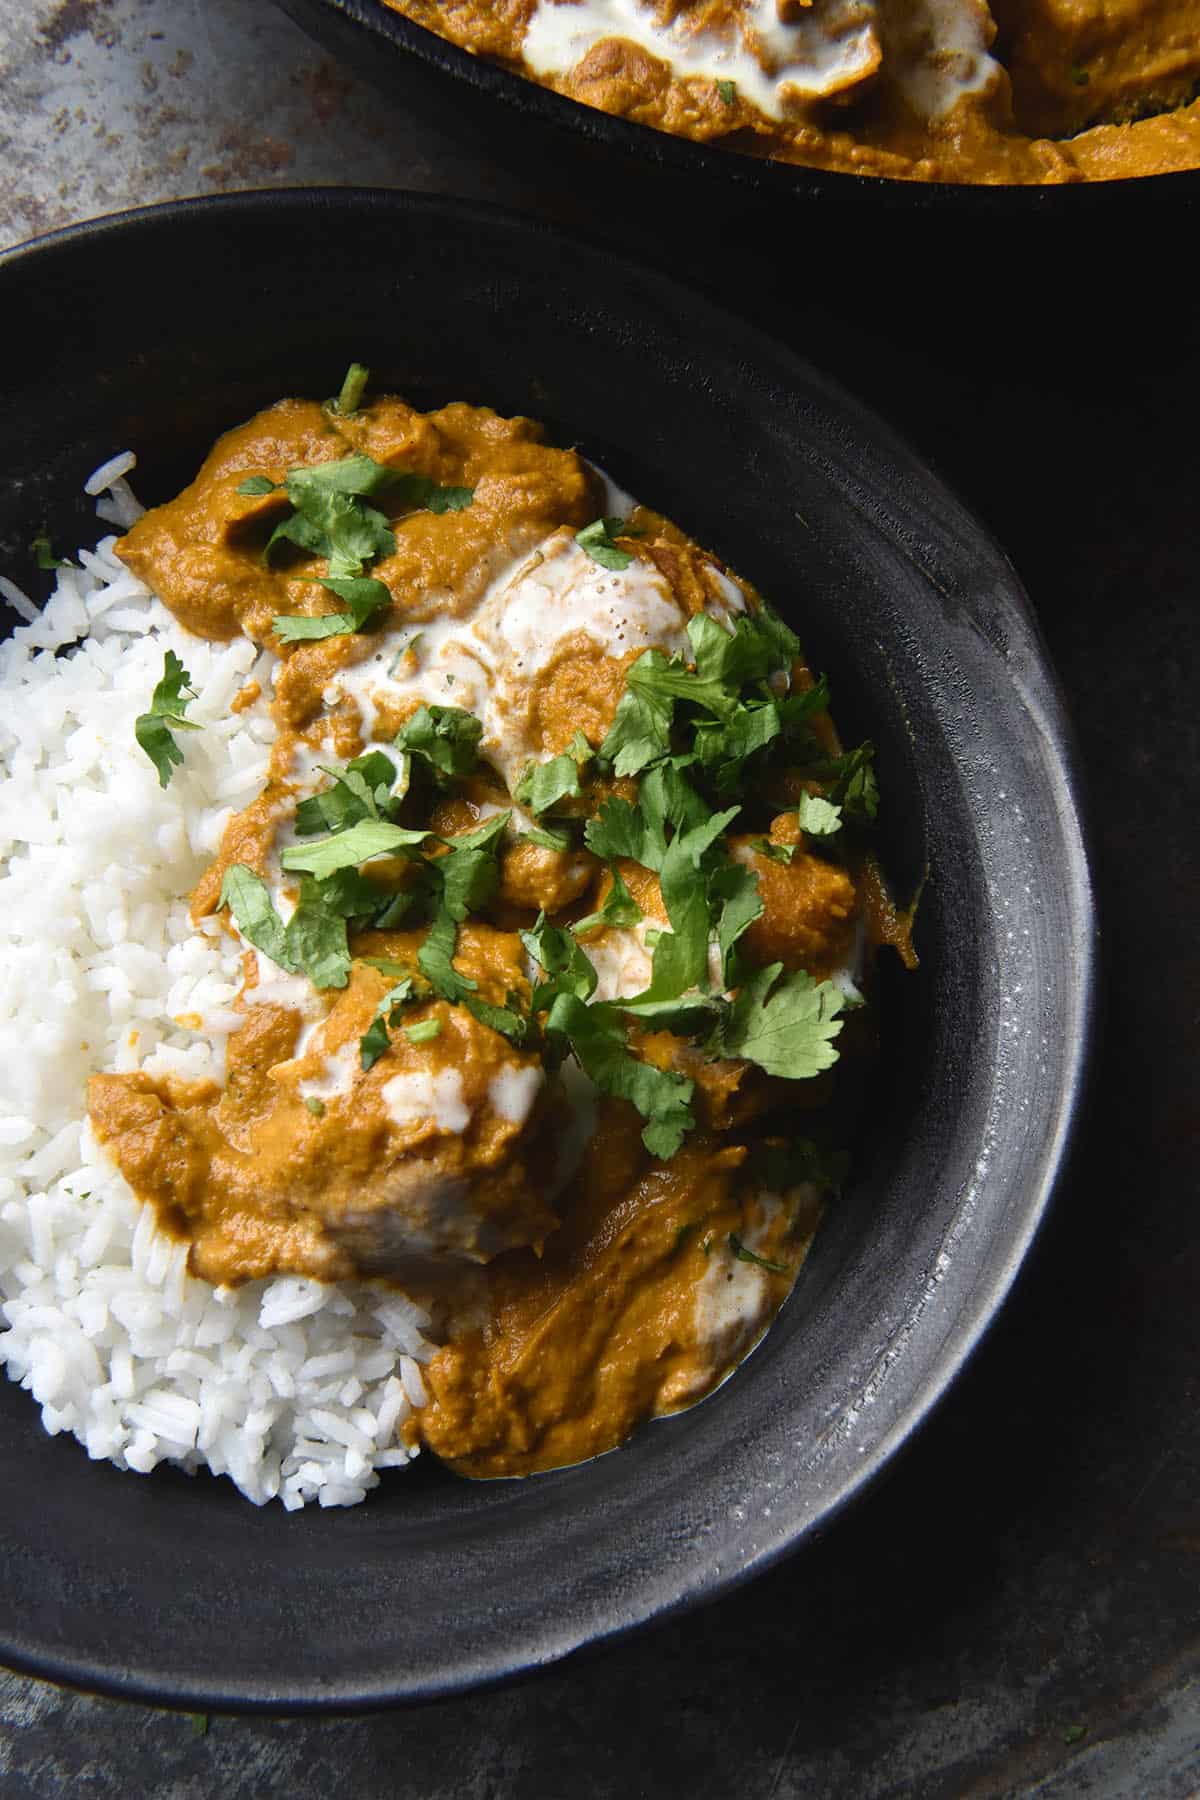 A moody aerial view of a dark grey ceramic bowl filled with rice and FODMAP friendly Malai kofta topped with cream and coriander. A skillet of Malai kofta sits in the top right corner of the image, which is set on a dark grey backdrop.